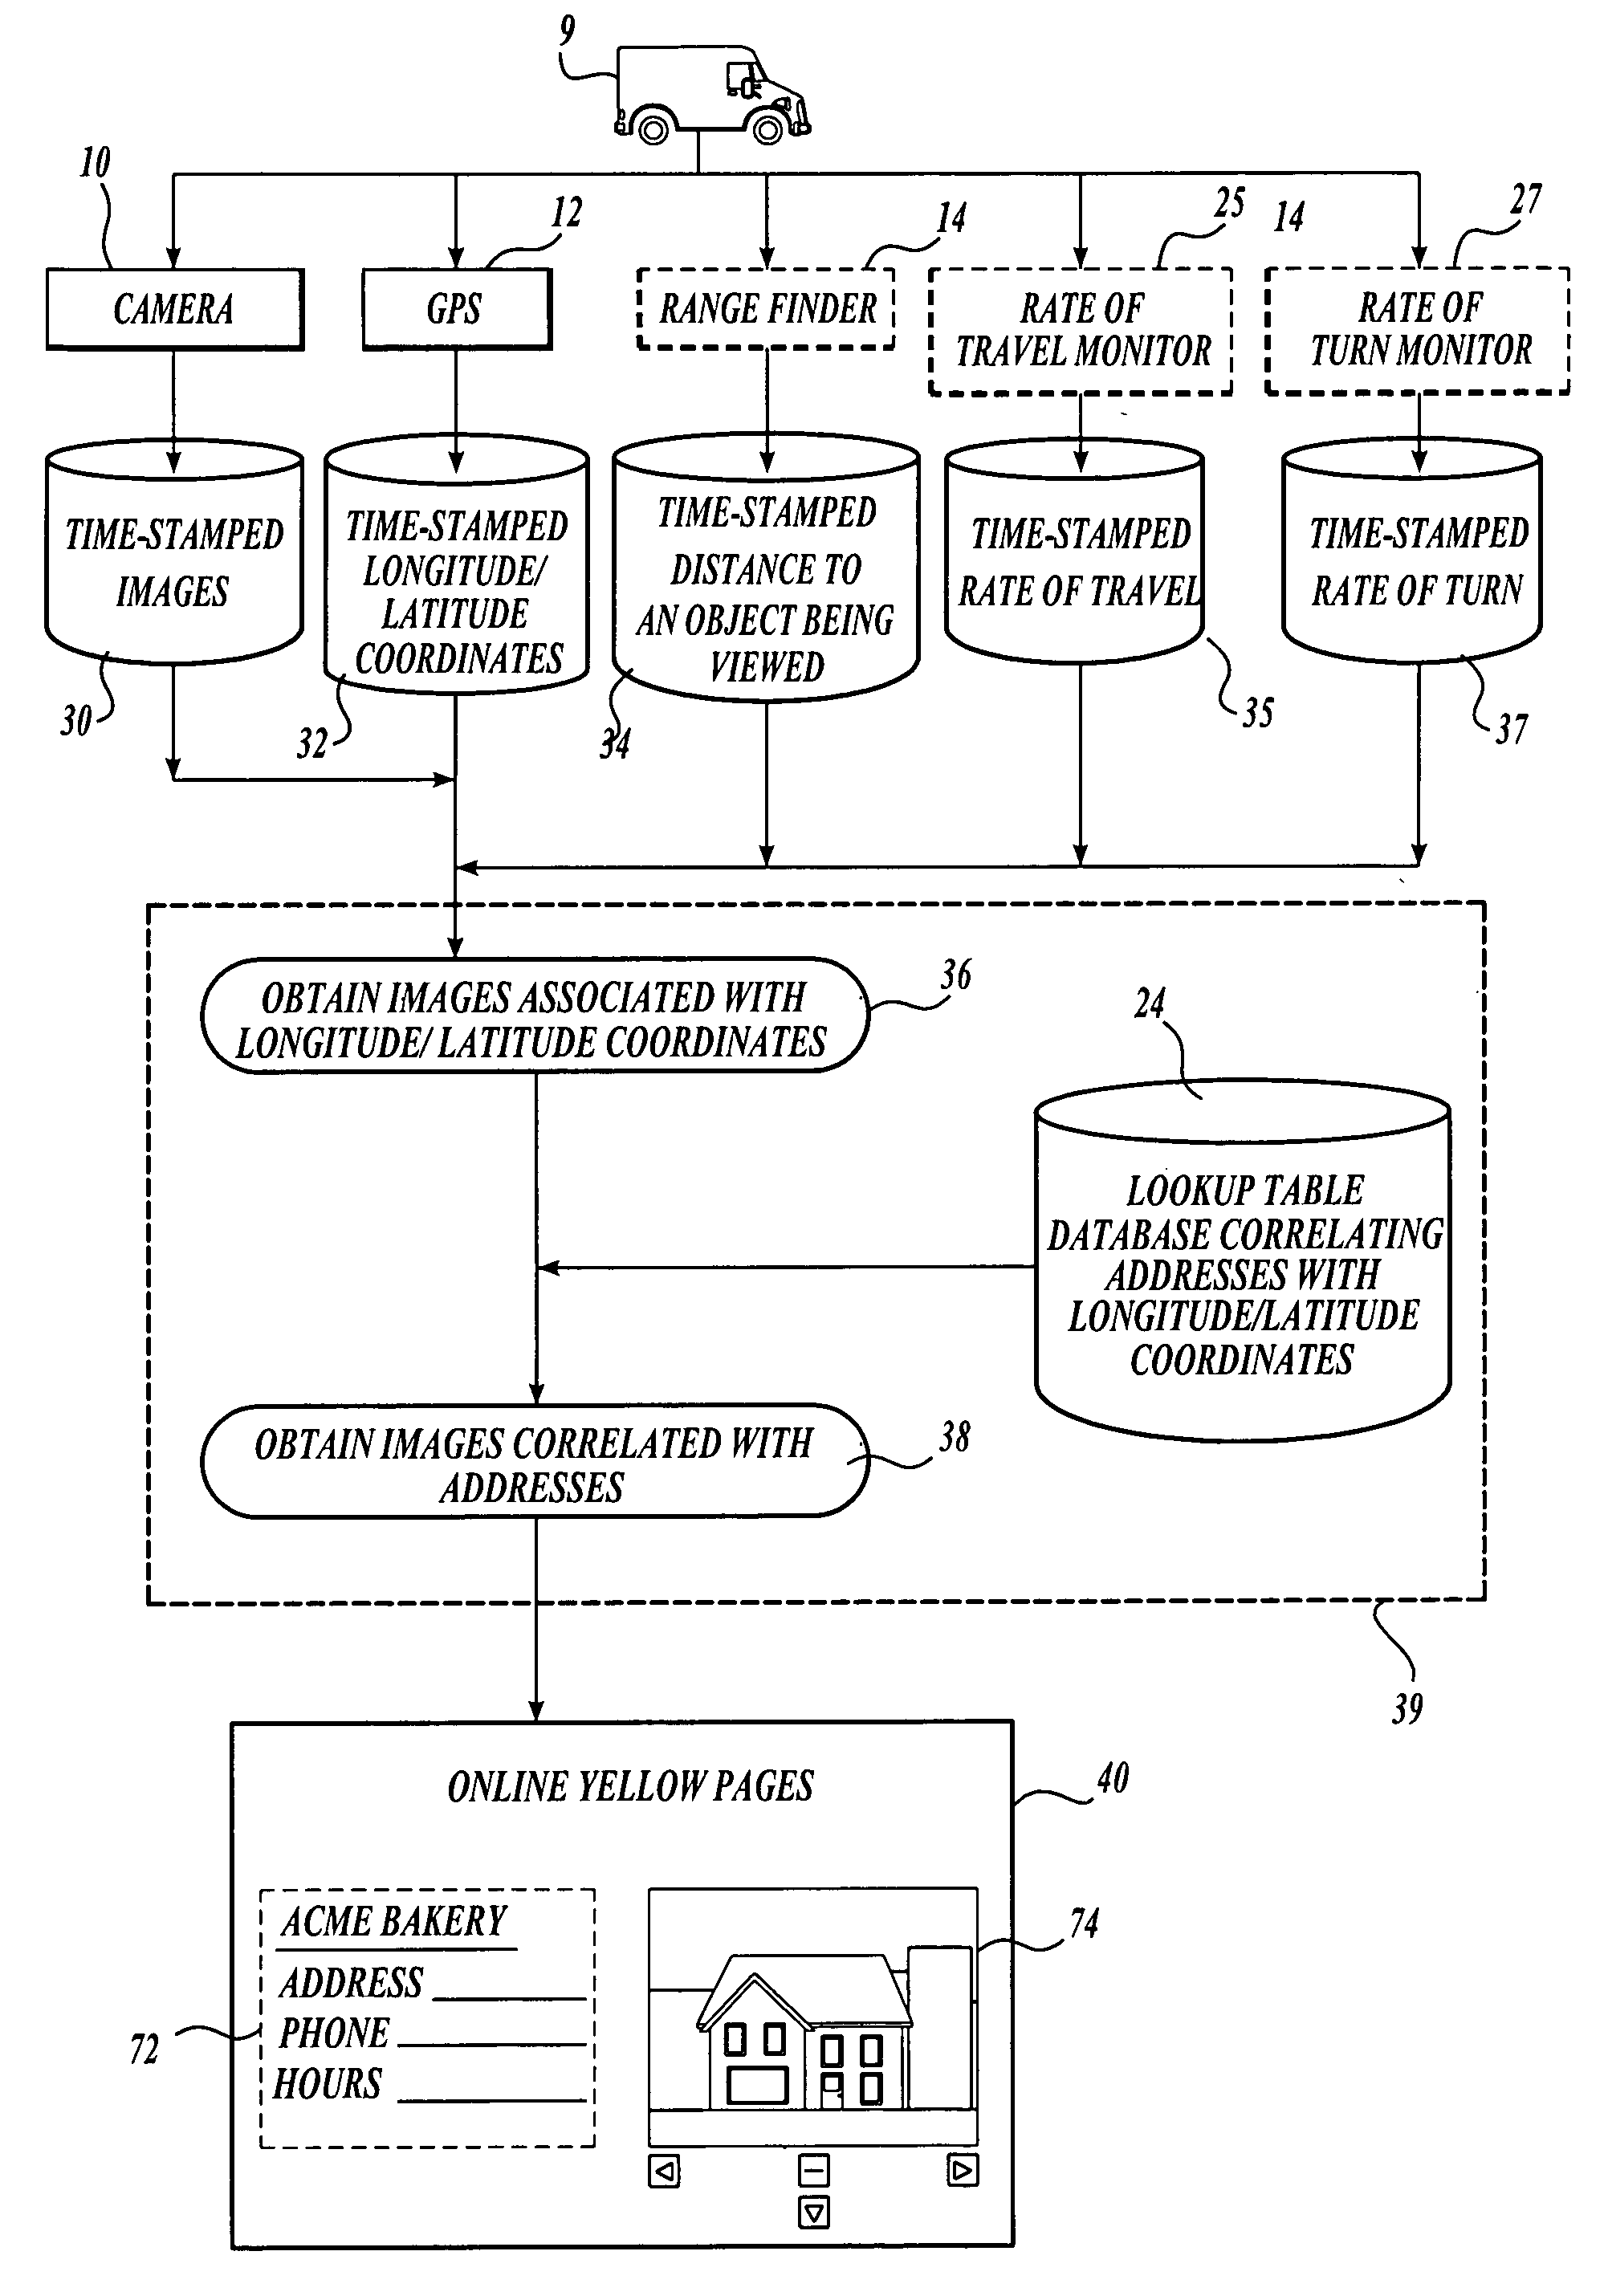 System and method for displaying images in an online directory